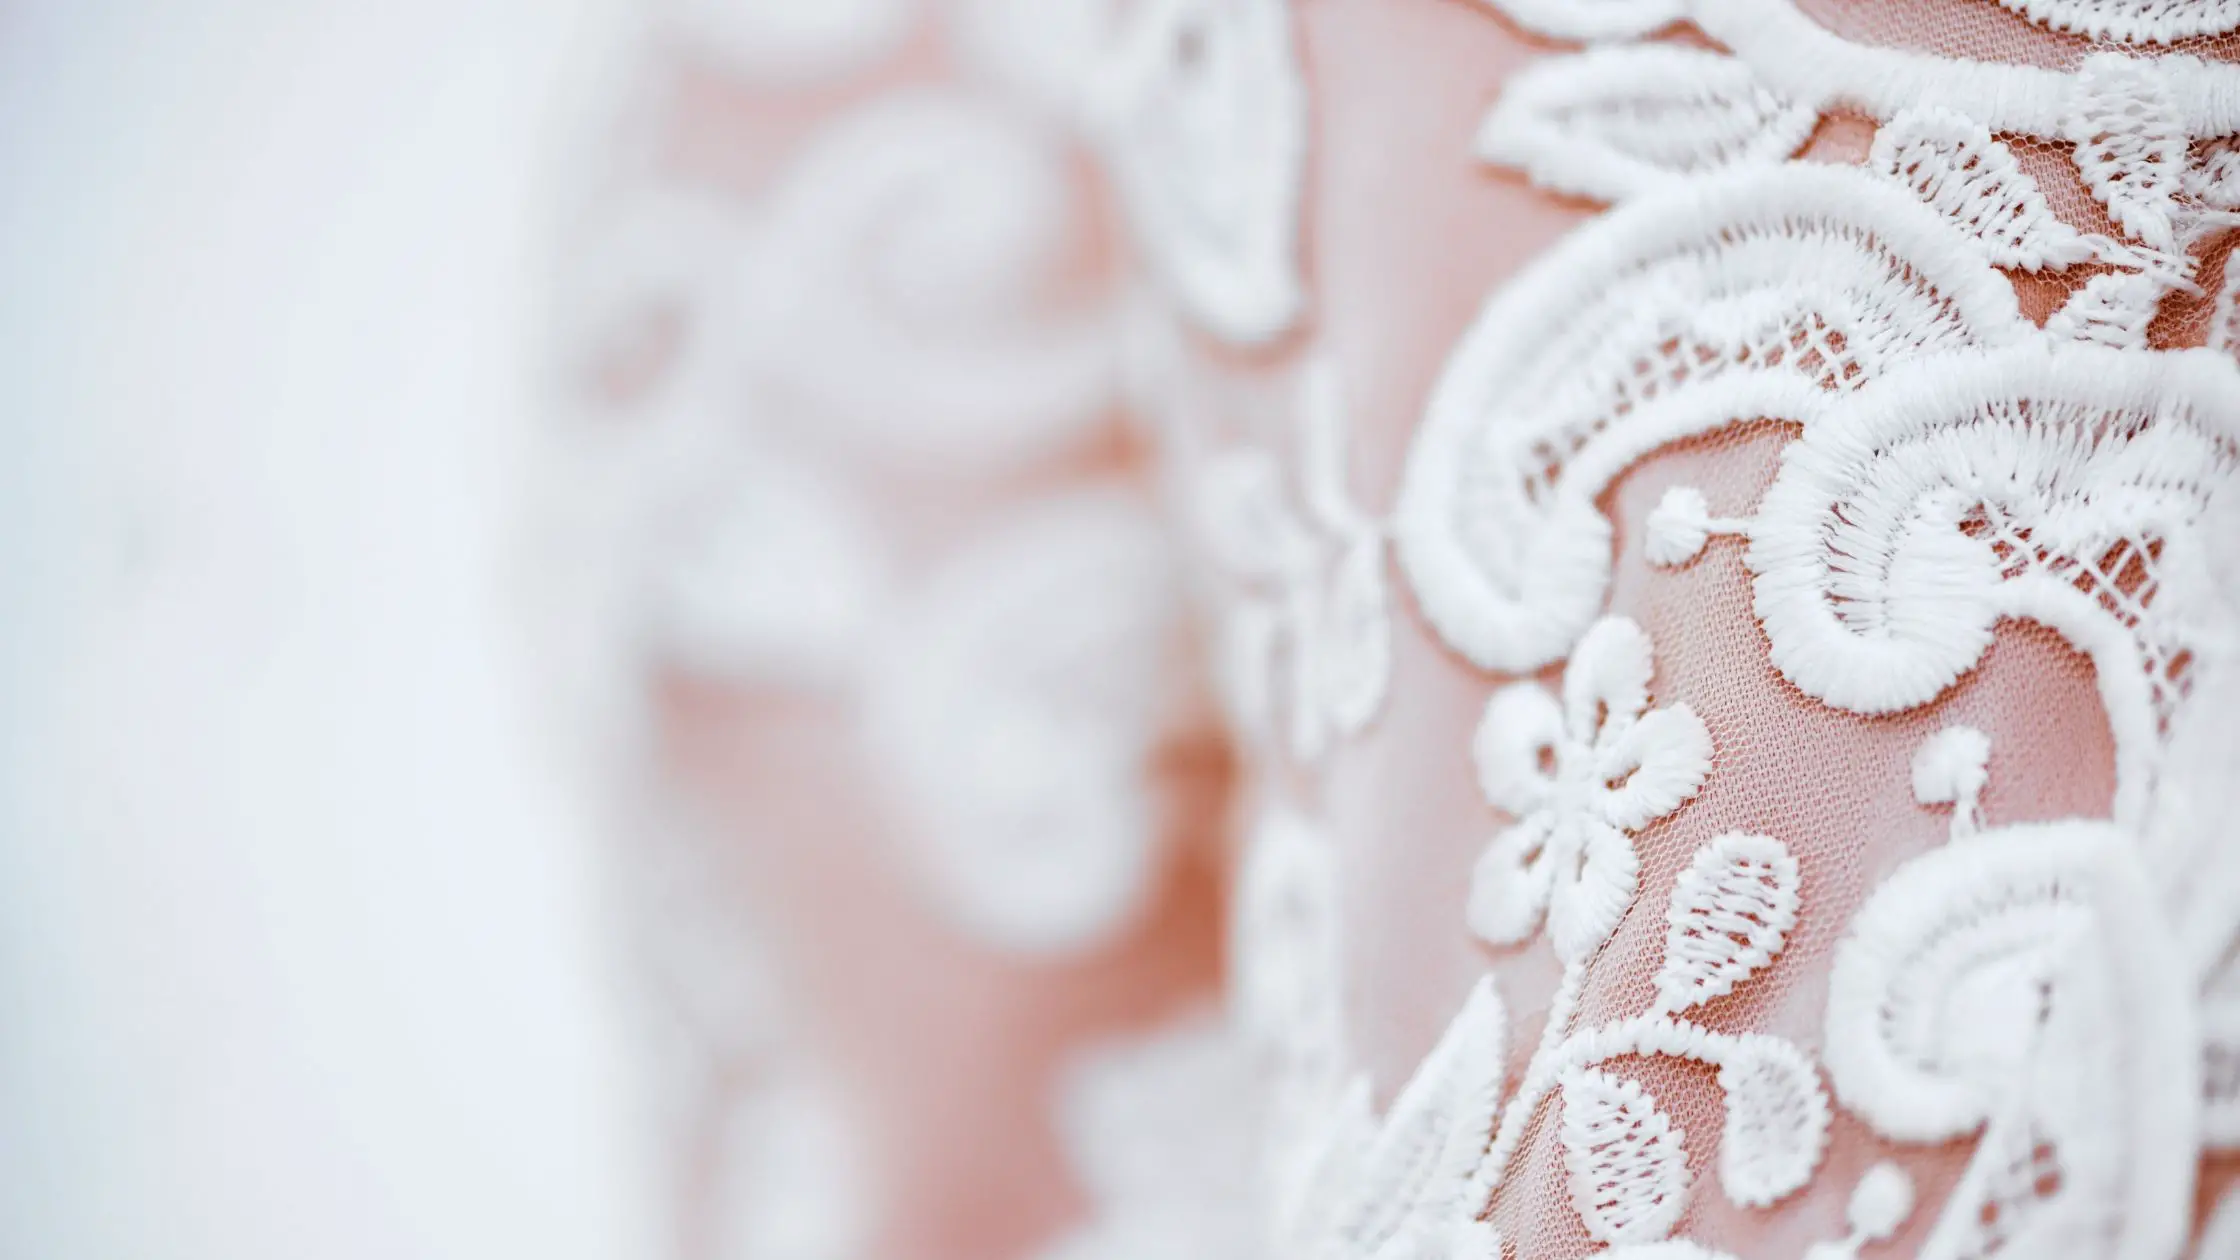 Different Types of Lace